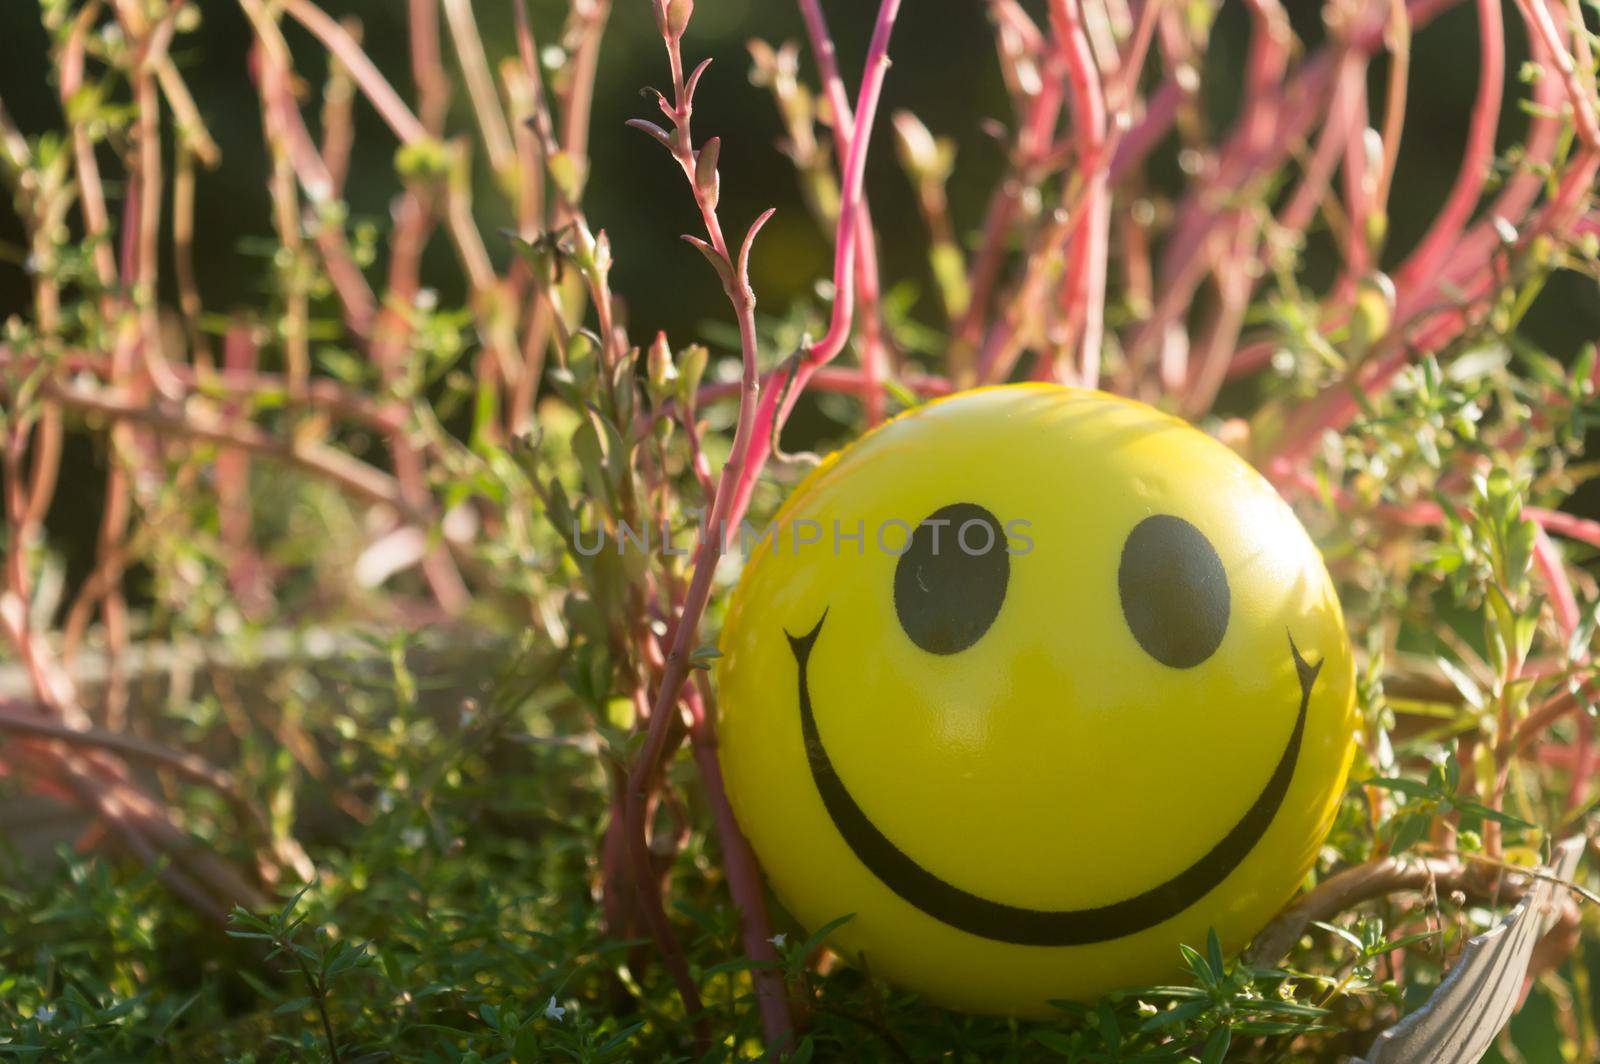 Closeup Emoji sign Smiley Face of a Squeeze Ball mouth representing a symbol of happiness, placed on plants and nature background. Front view. Happy smile background concept.